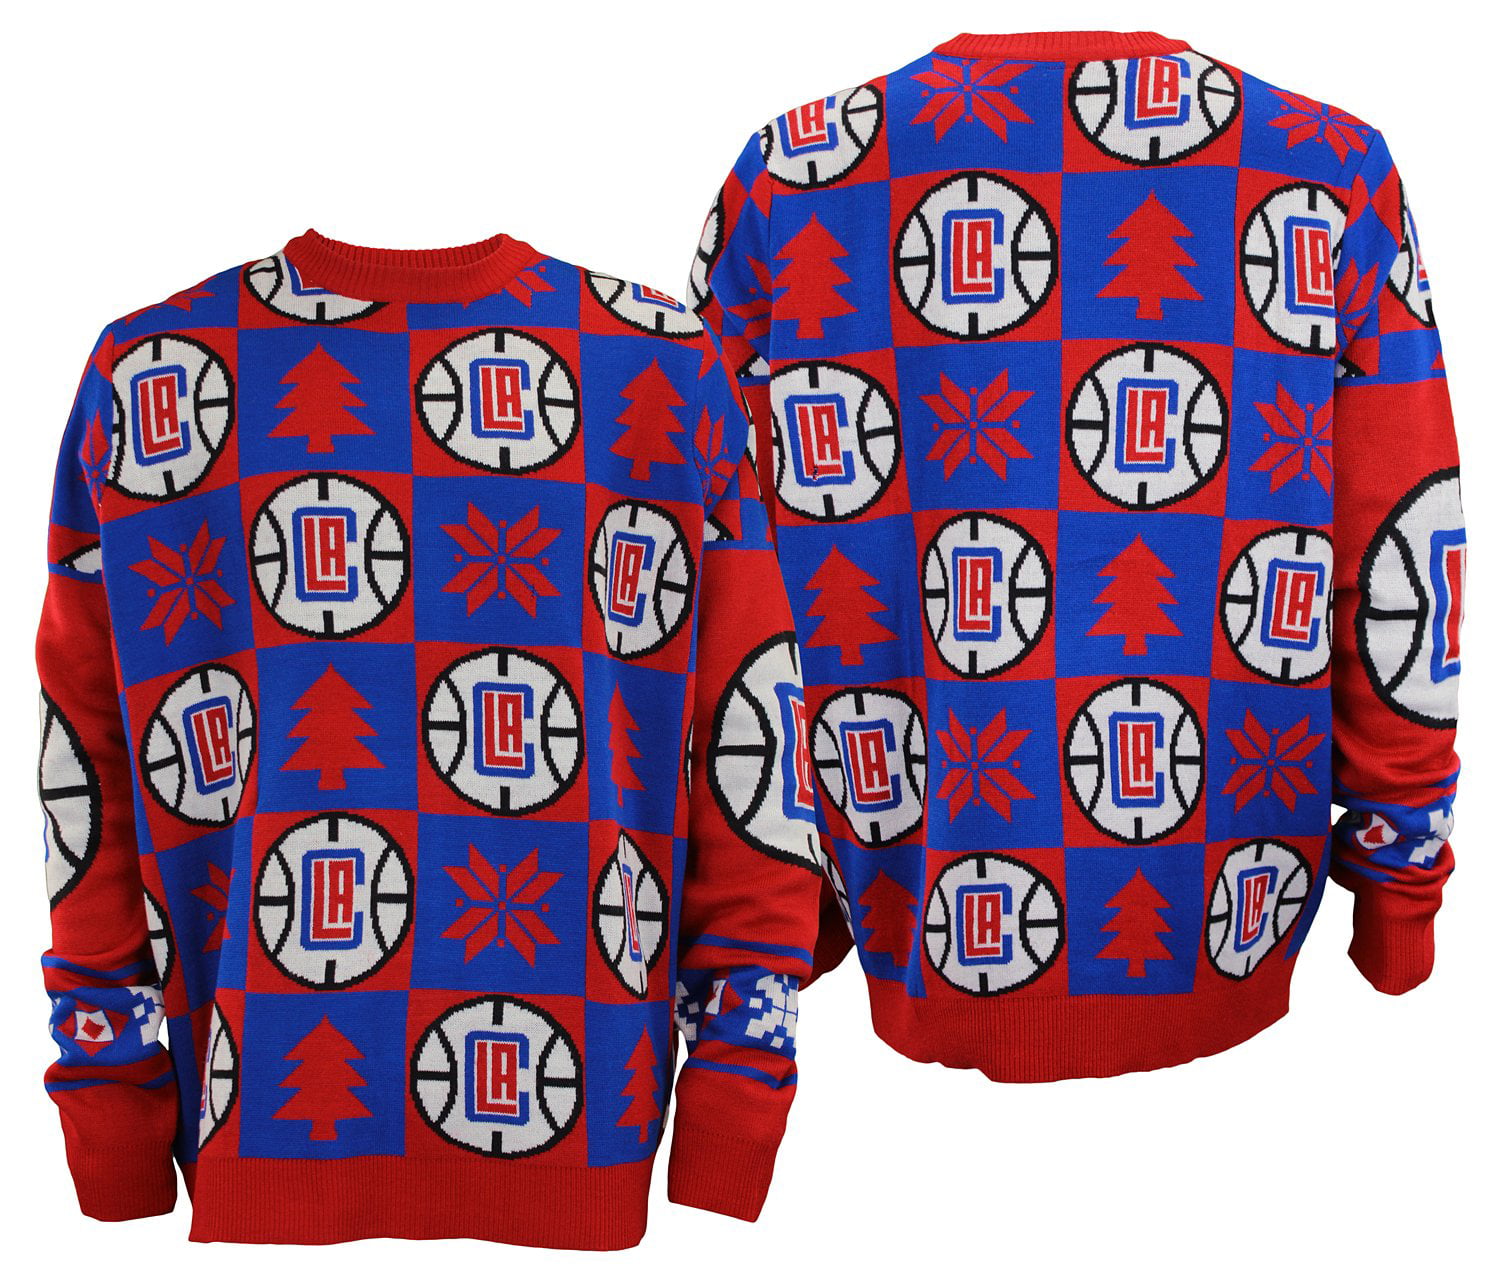 la clippers ugly sweater